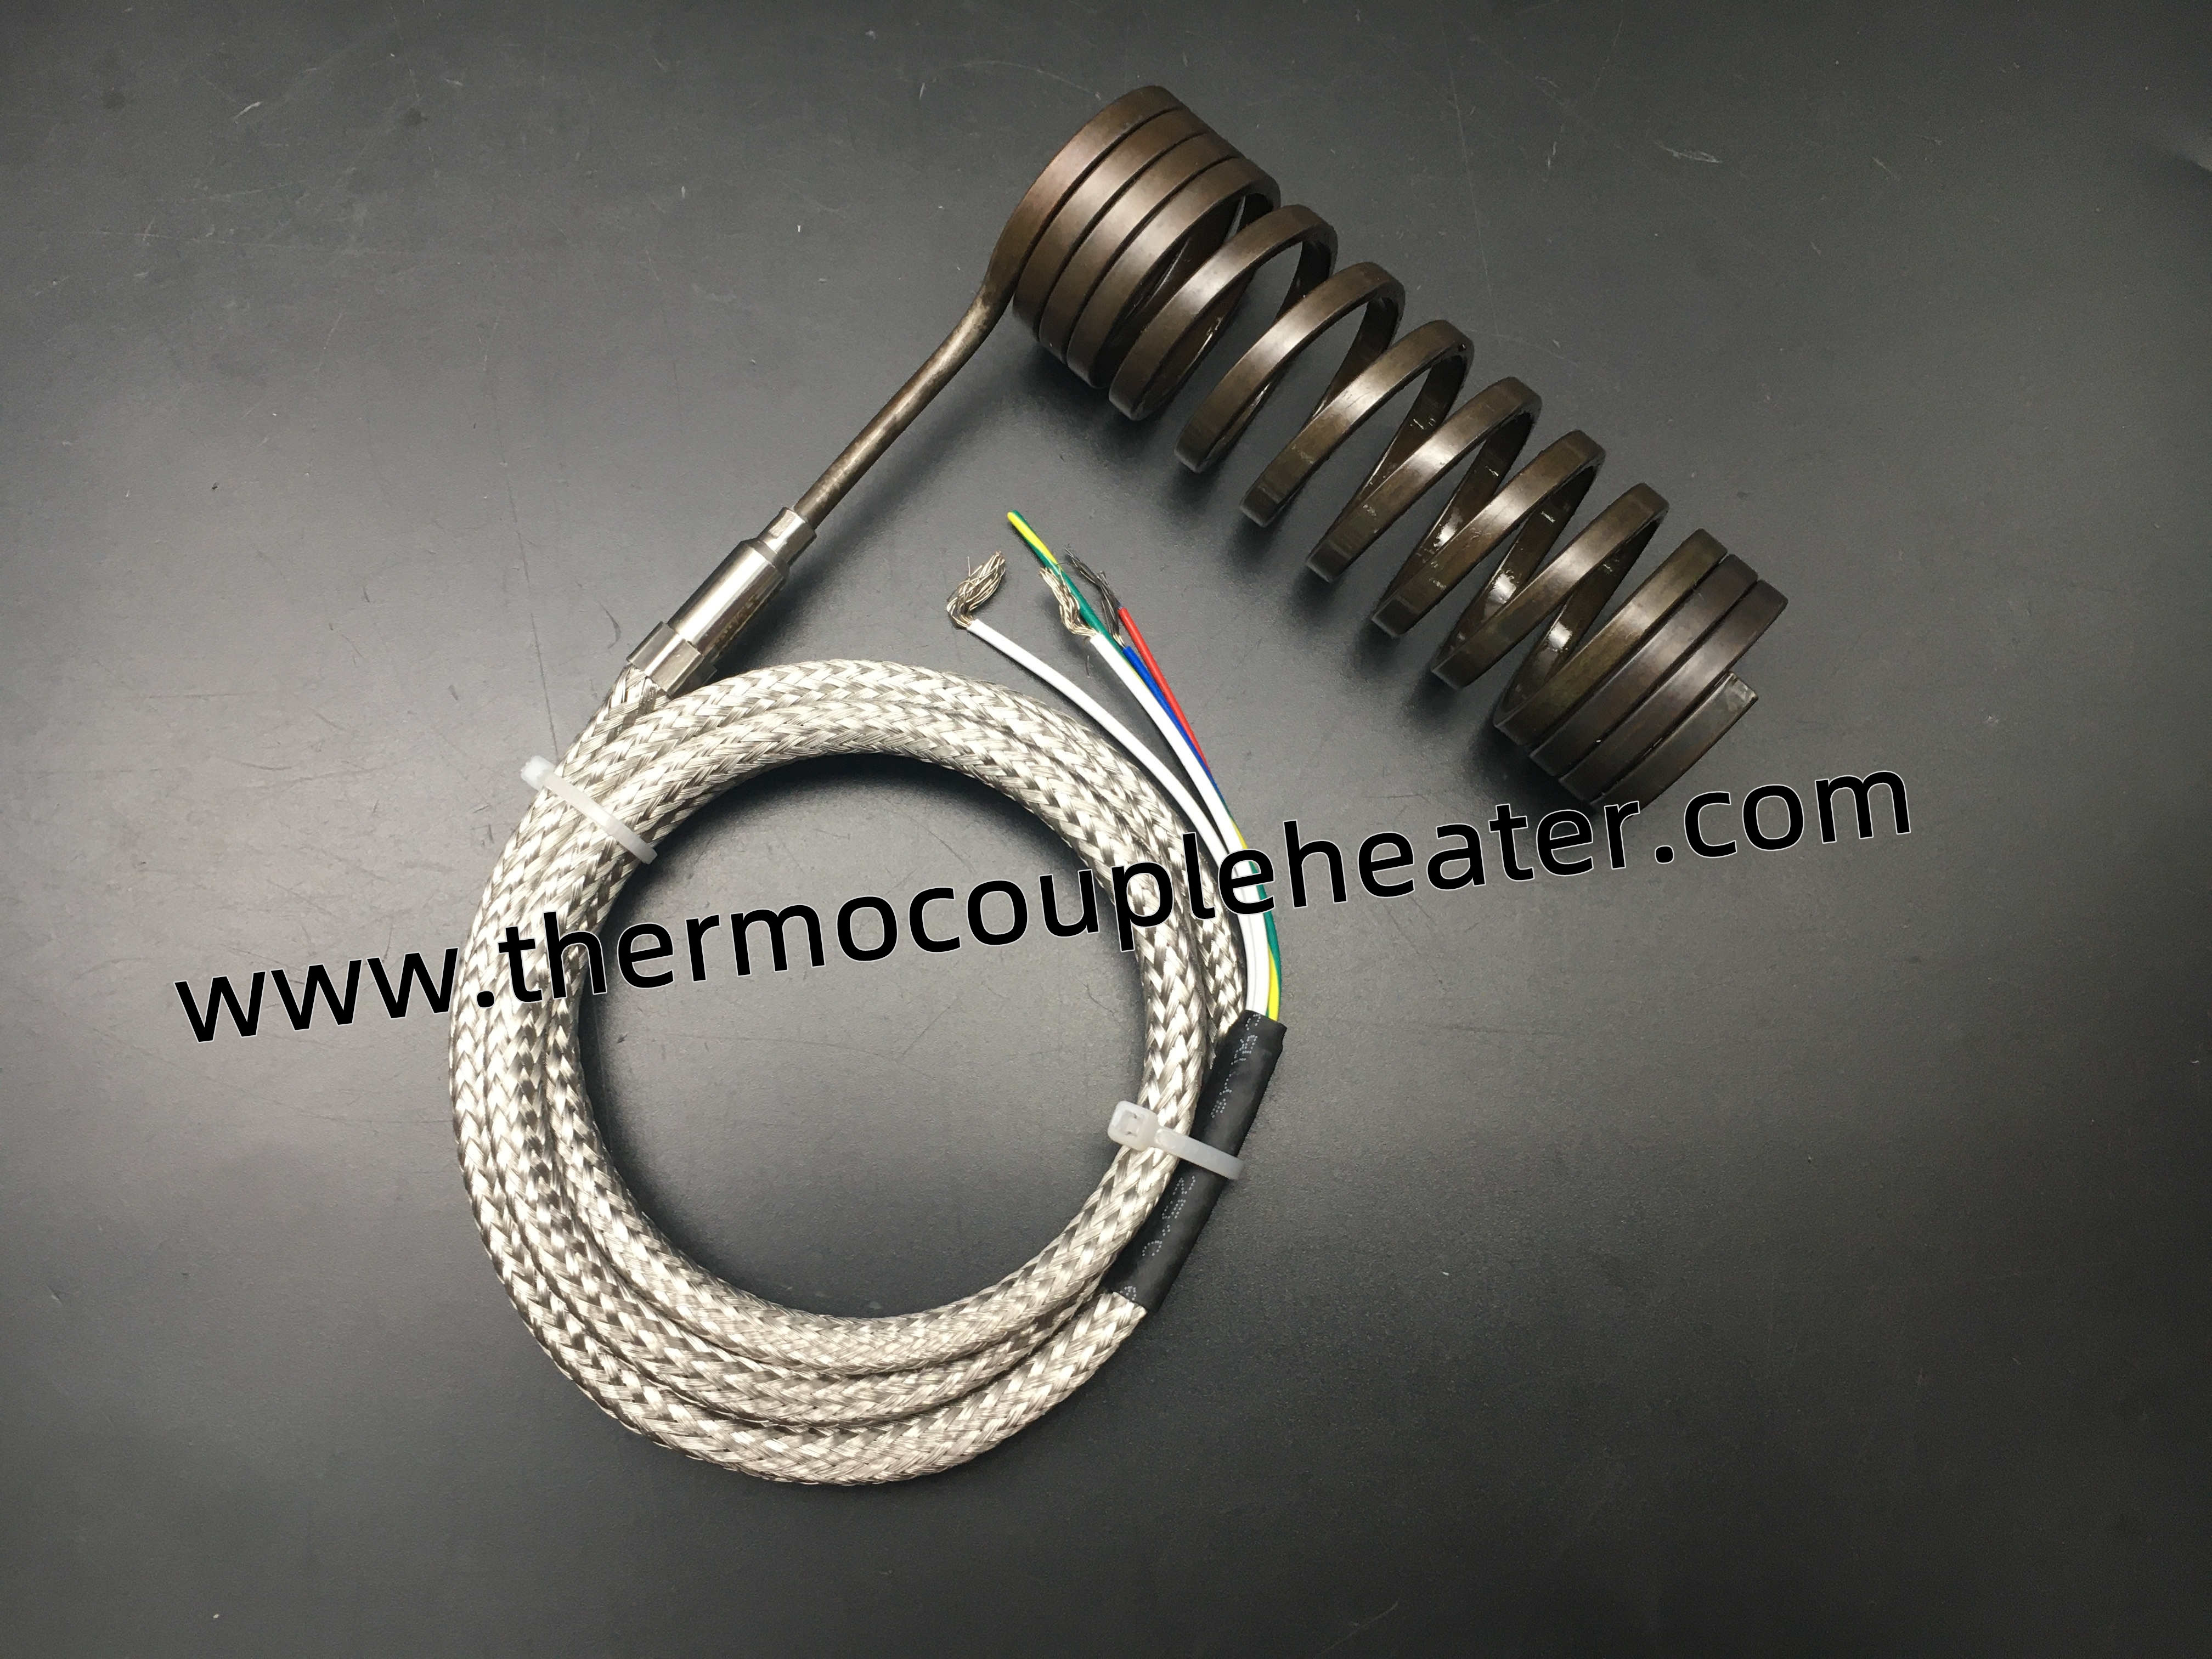 Hot Runner System Spiral Heater With Built In Thermocouple J